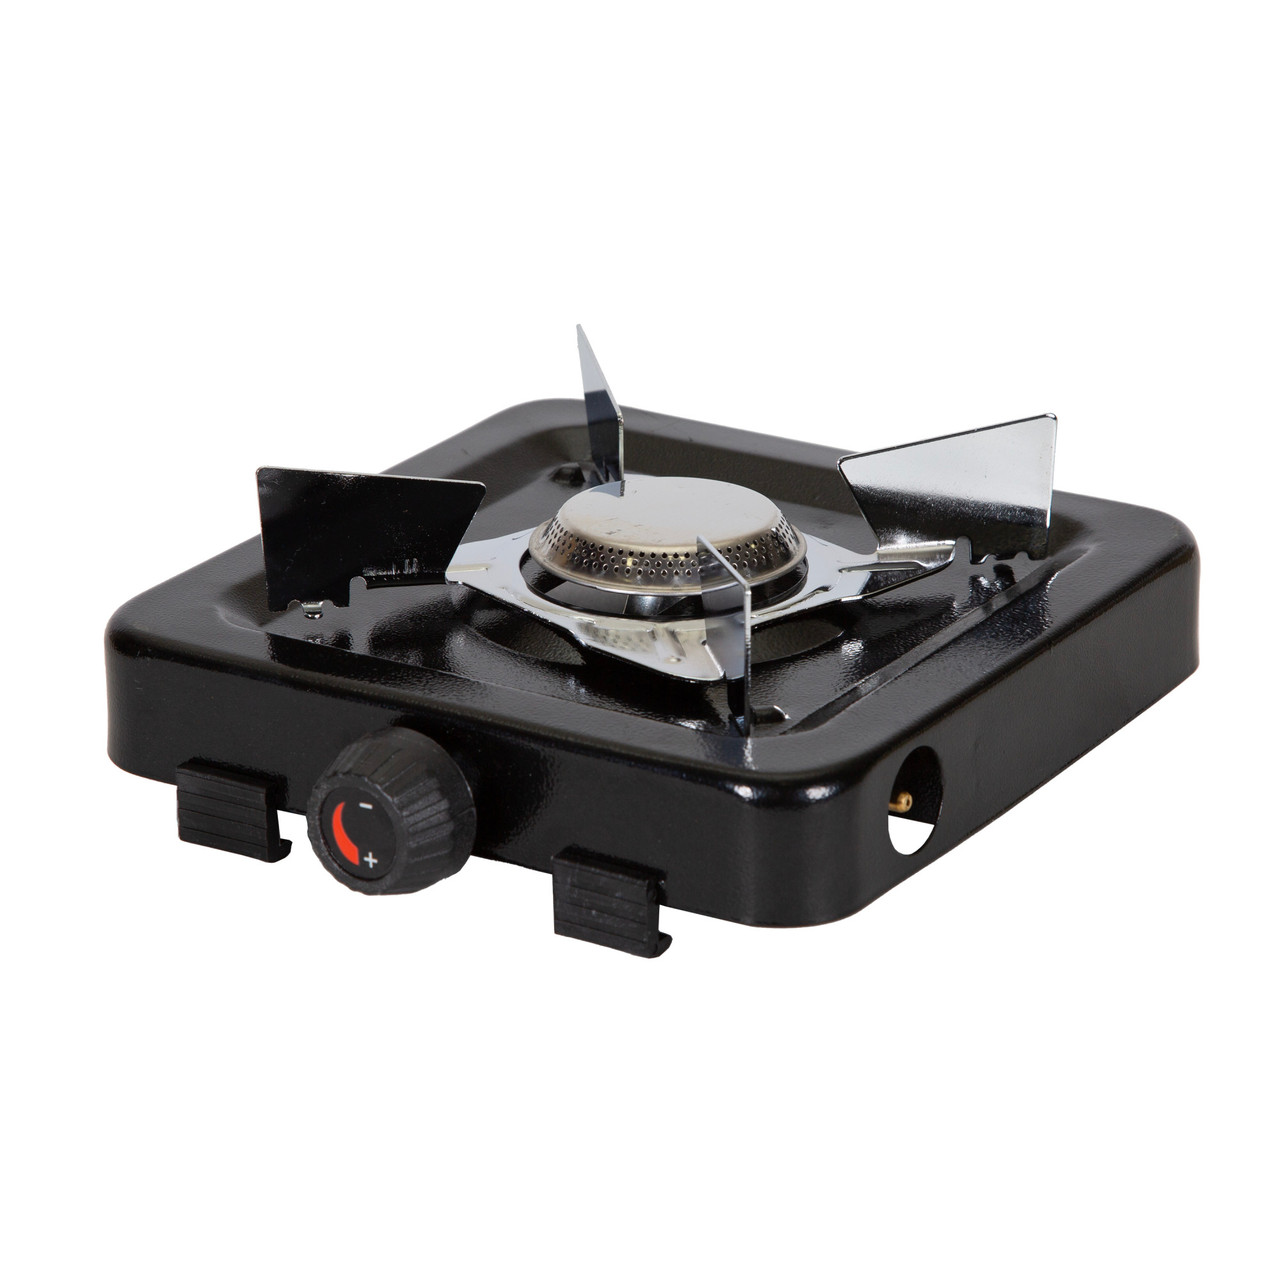 Ozark Trail 4 in 1 portable stove (PRODUCT REVIEW) 